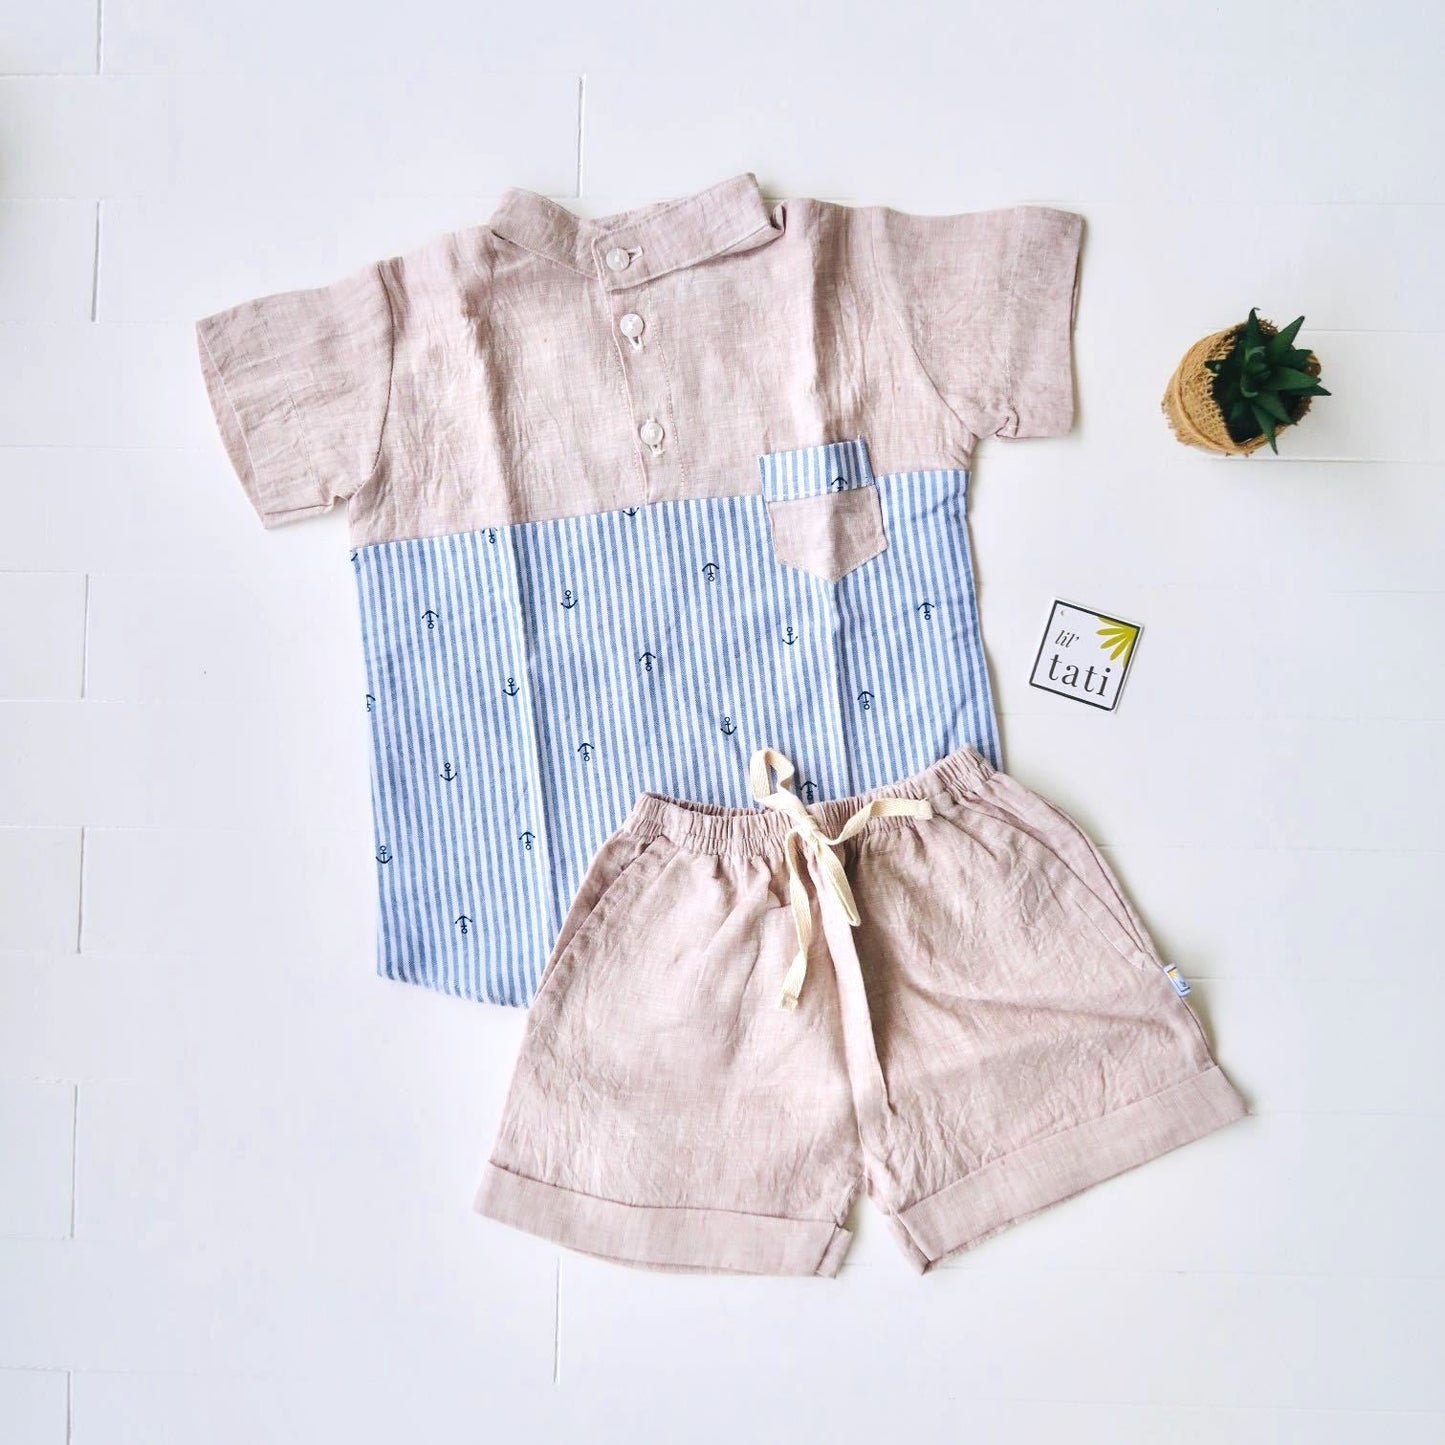 Maple Top & Shorts in Anchor Stripes and Dark Beige Linen - Lil' Tati